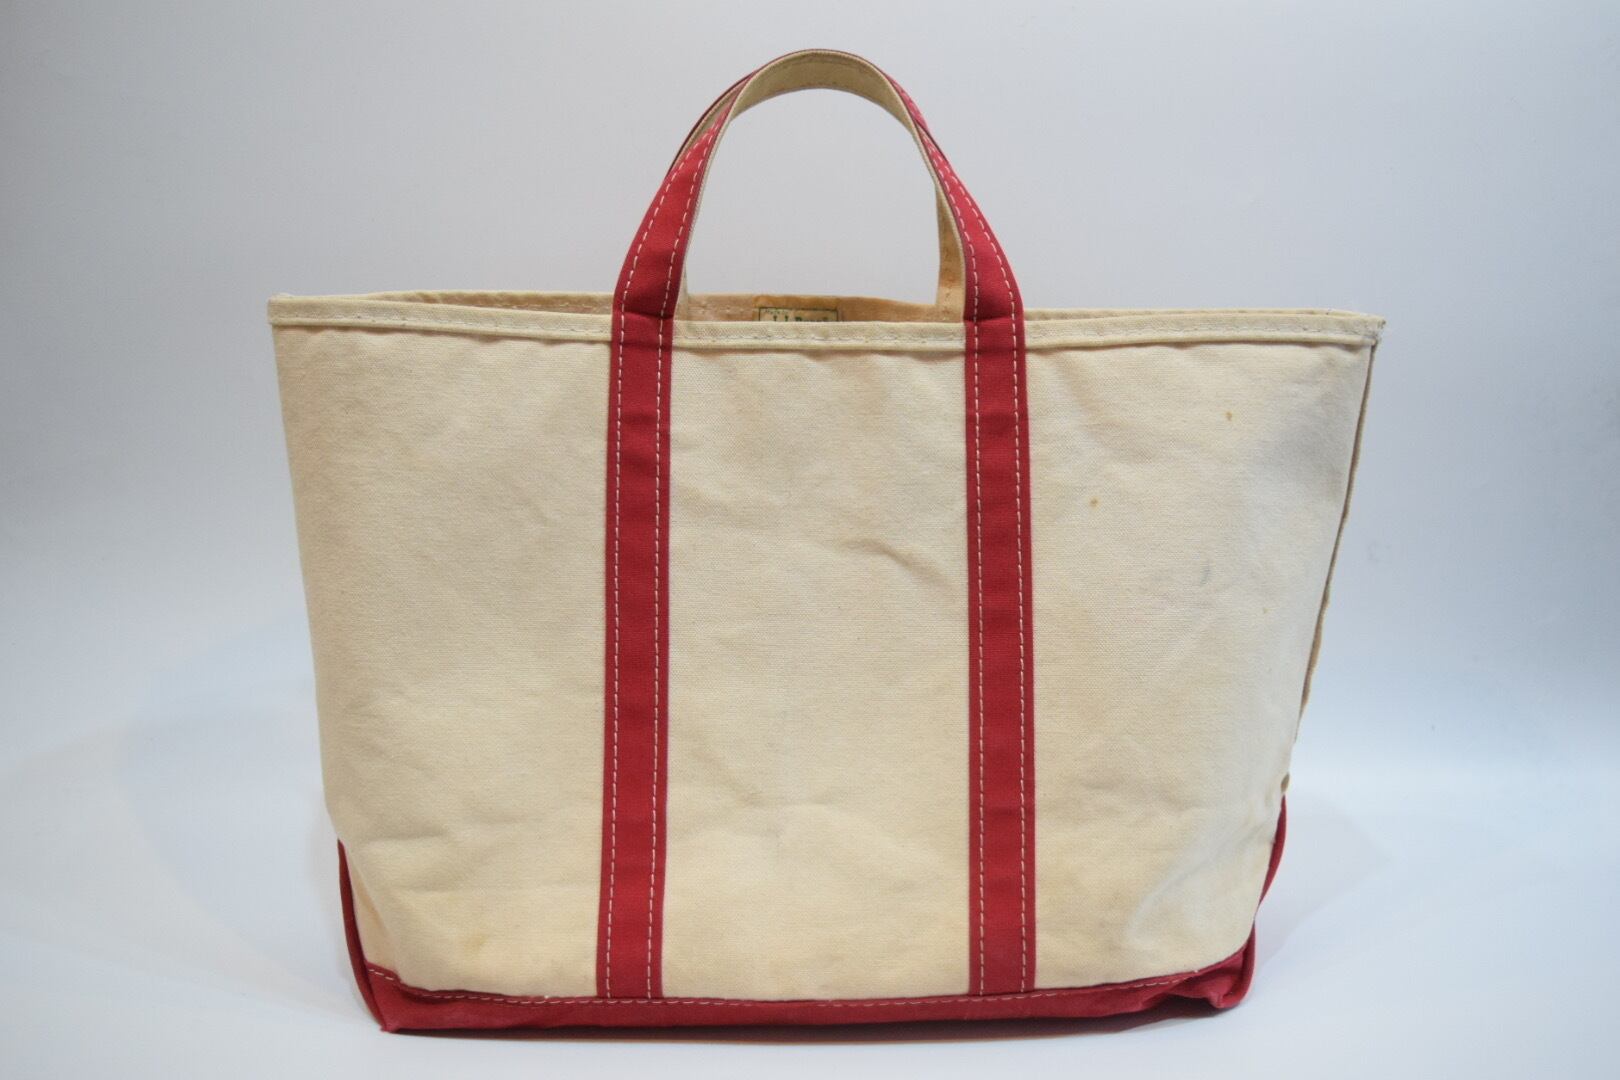 USED 80s L.L.bean Boat and tote 0120